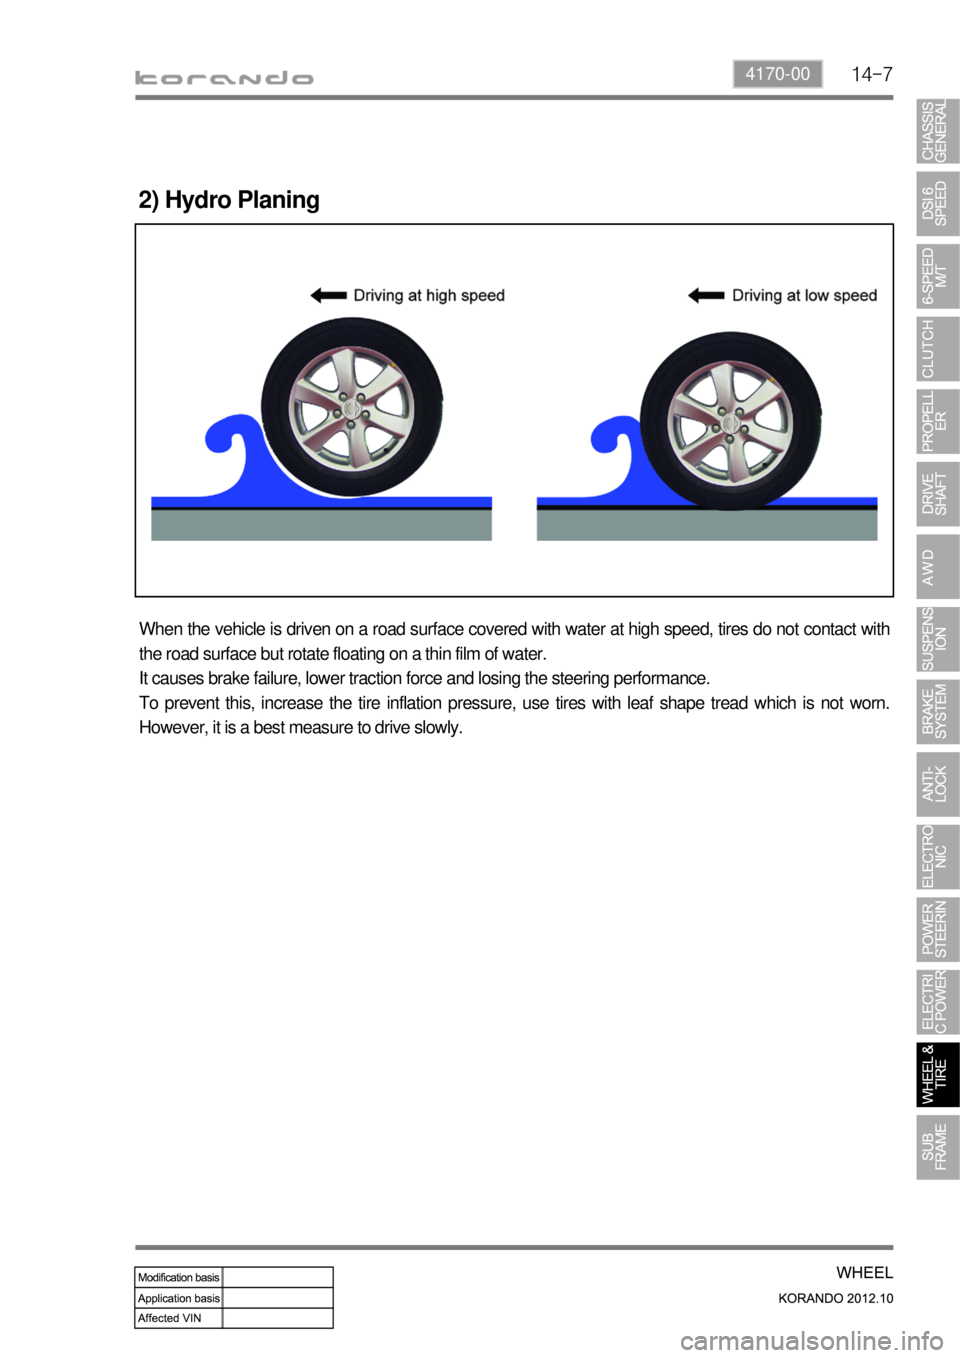 SSANGYONG KORANDO 2012  Service Manual 14-74170-00
When the vehicle is driven on a road surface covered with water at high speed, tires do not contact with 
the road surface but rotate floating on a thin film of water.
It causes brake fail